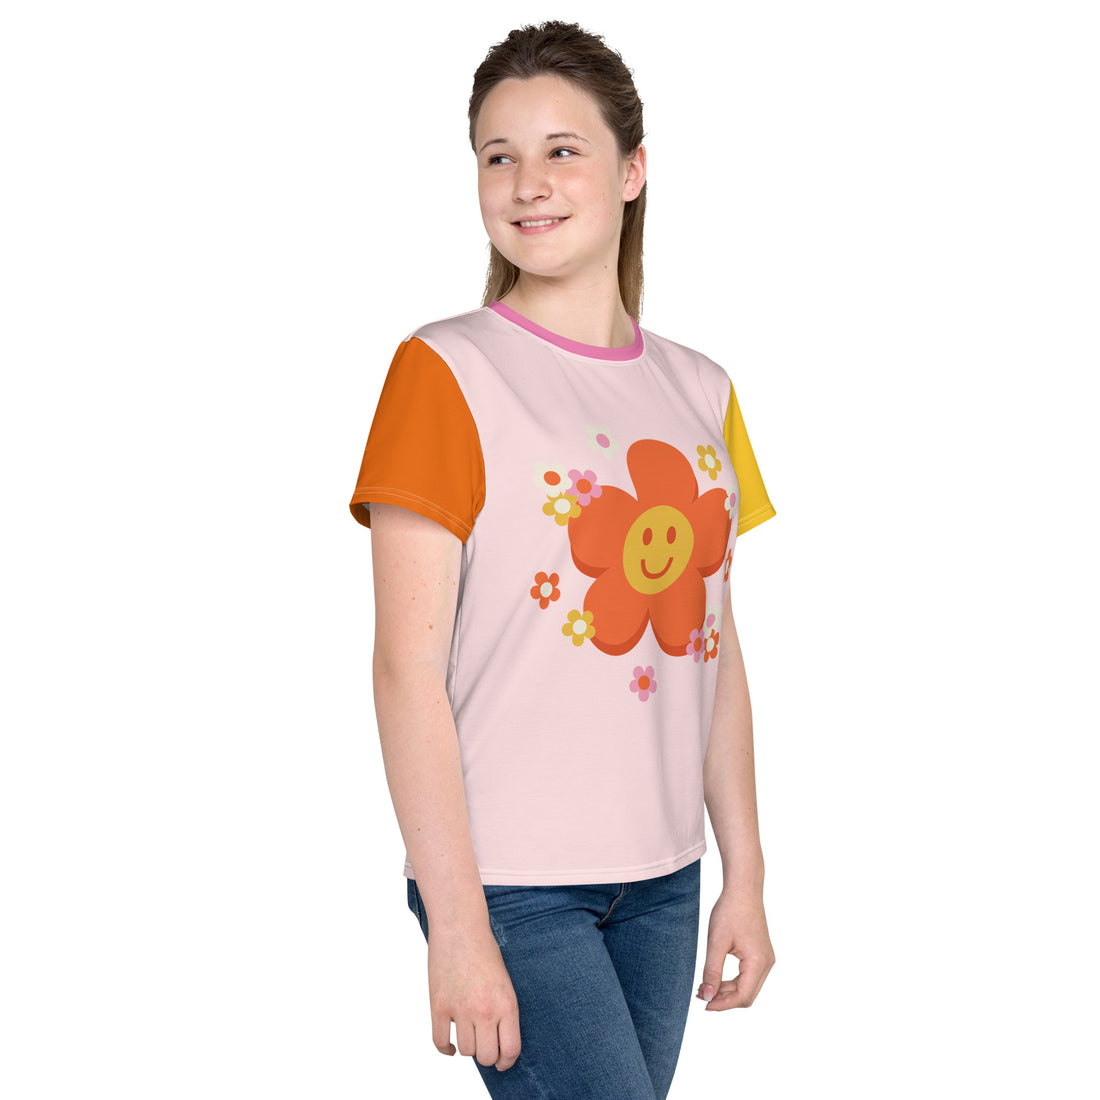 Smiley Flower Youth Tee